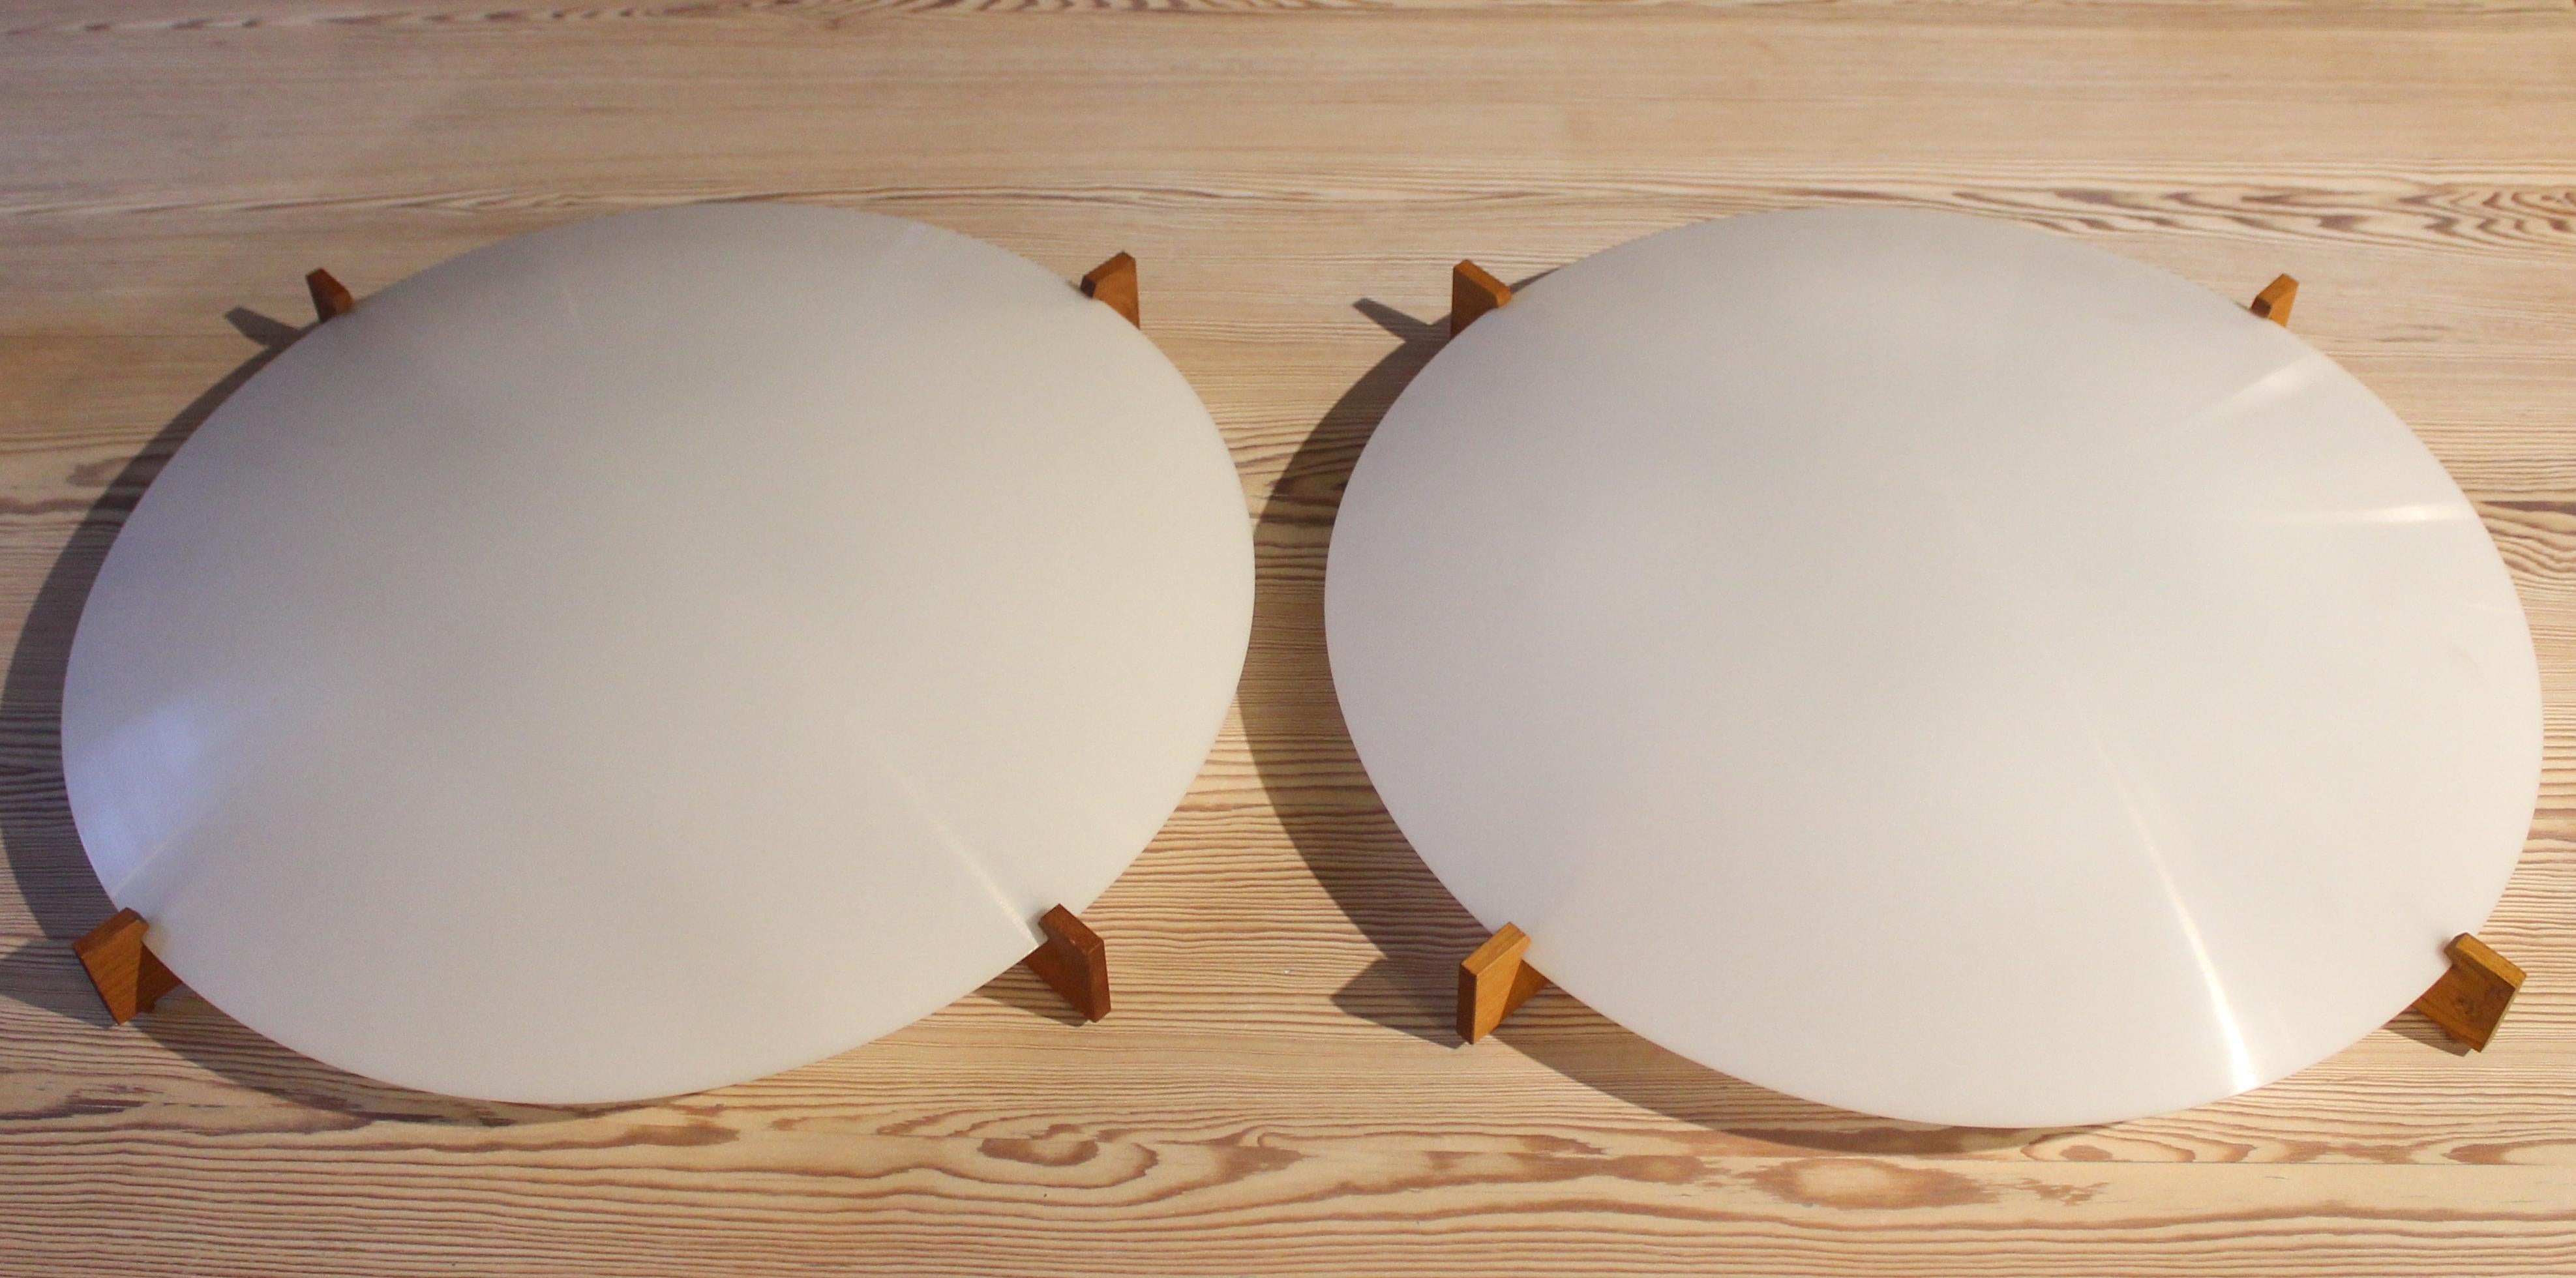 A pair of lamp scones designed by Uno & Östen Kristiansson for their company Luxus from Vittsjö, Sweden. These lamps were designed and produced in the 1960s. This is one of the larger models that measures 55 cm in diameter. The frame is made out of